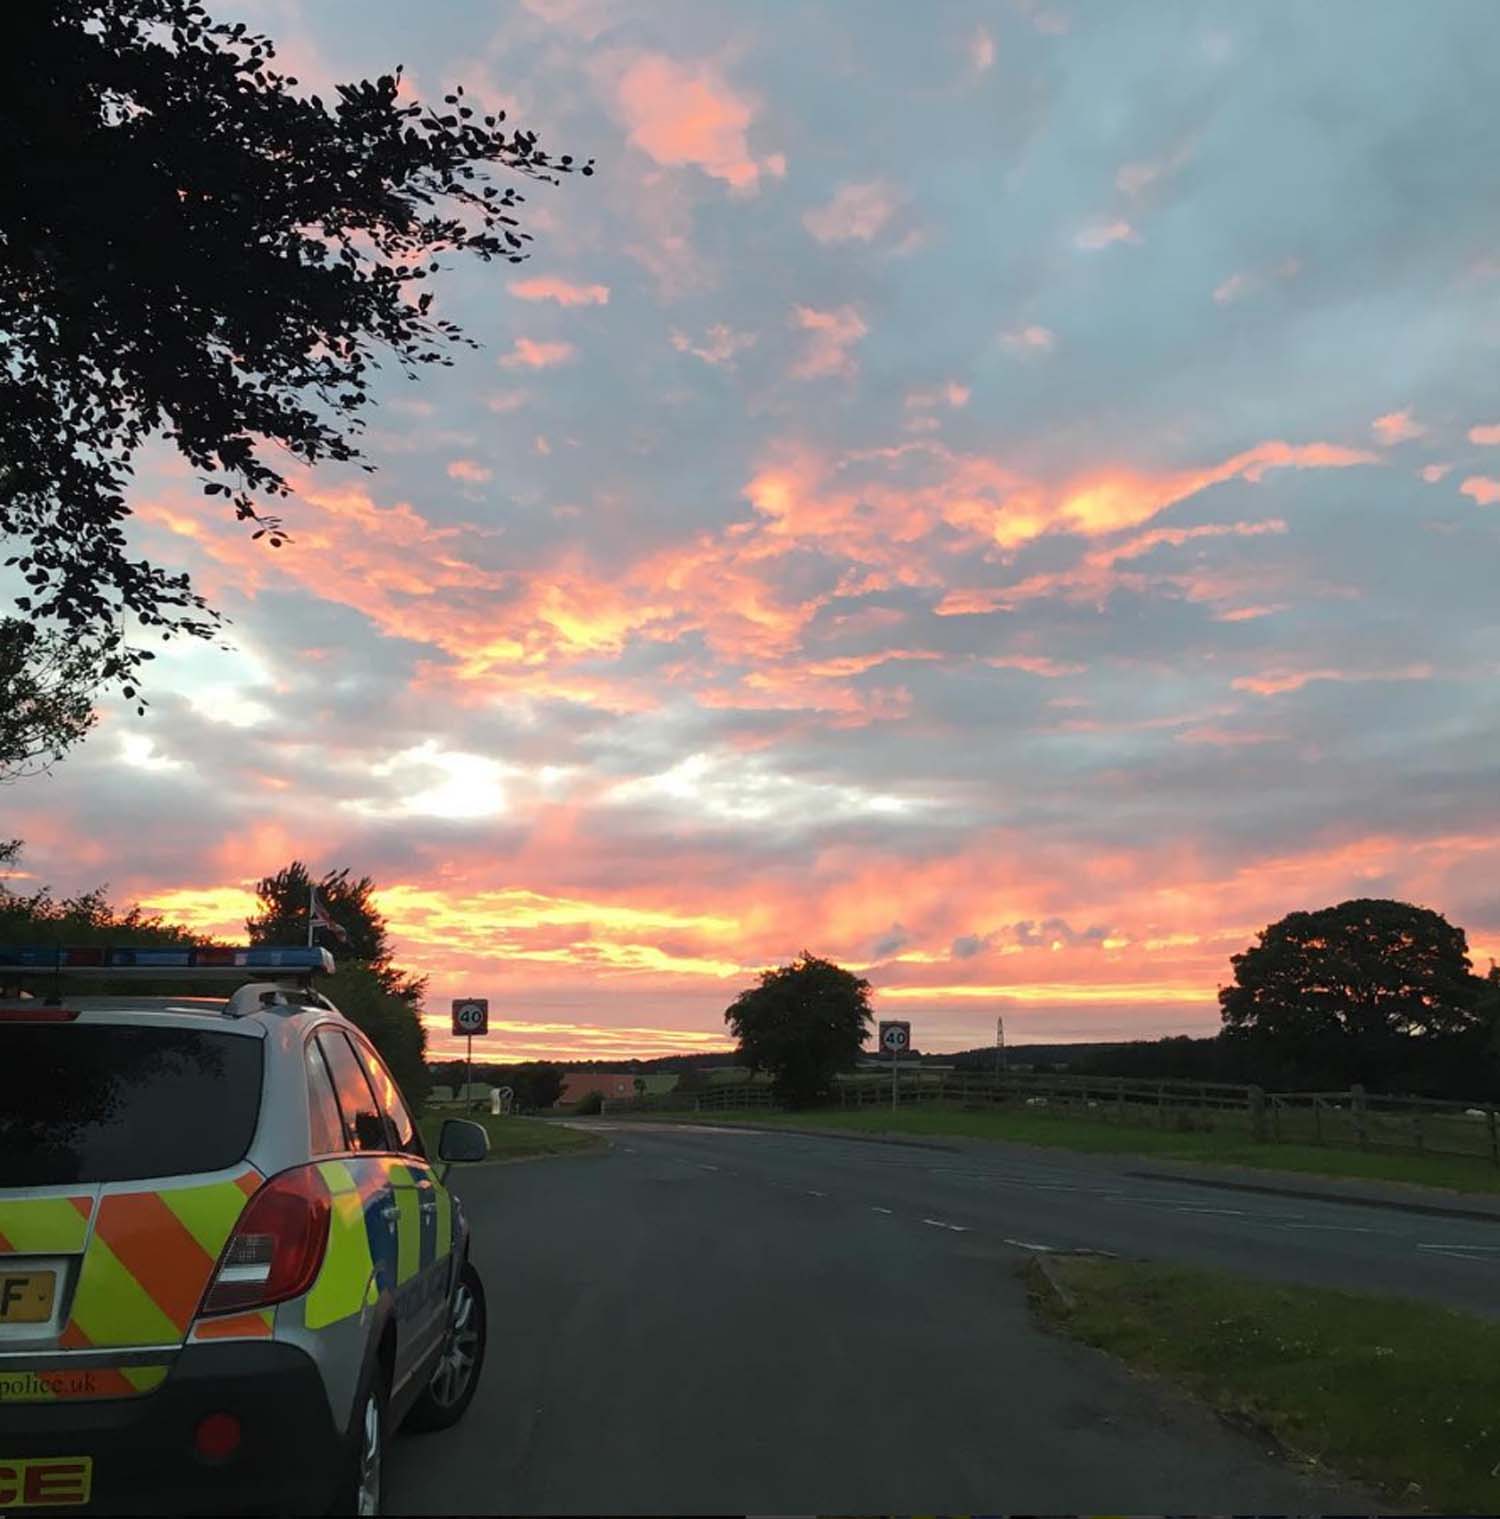 A wonderful evening sky for rural patrol in North Yorkshire